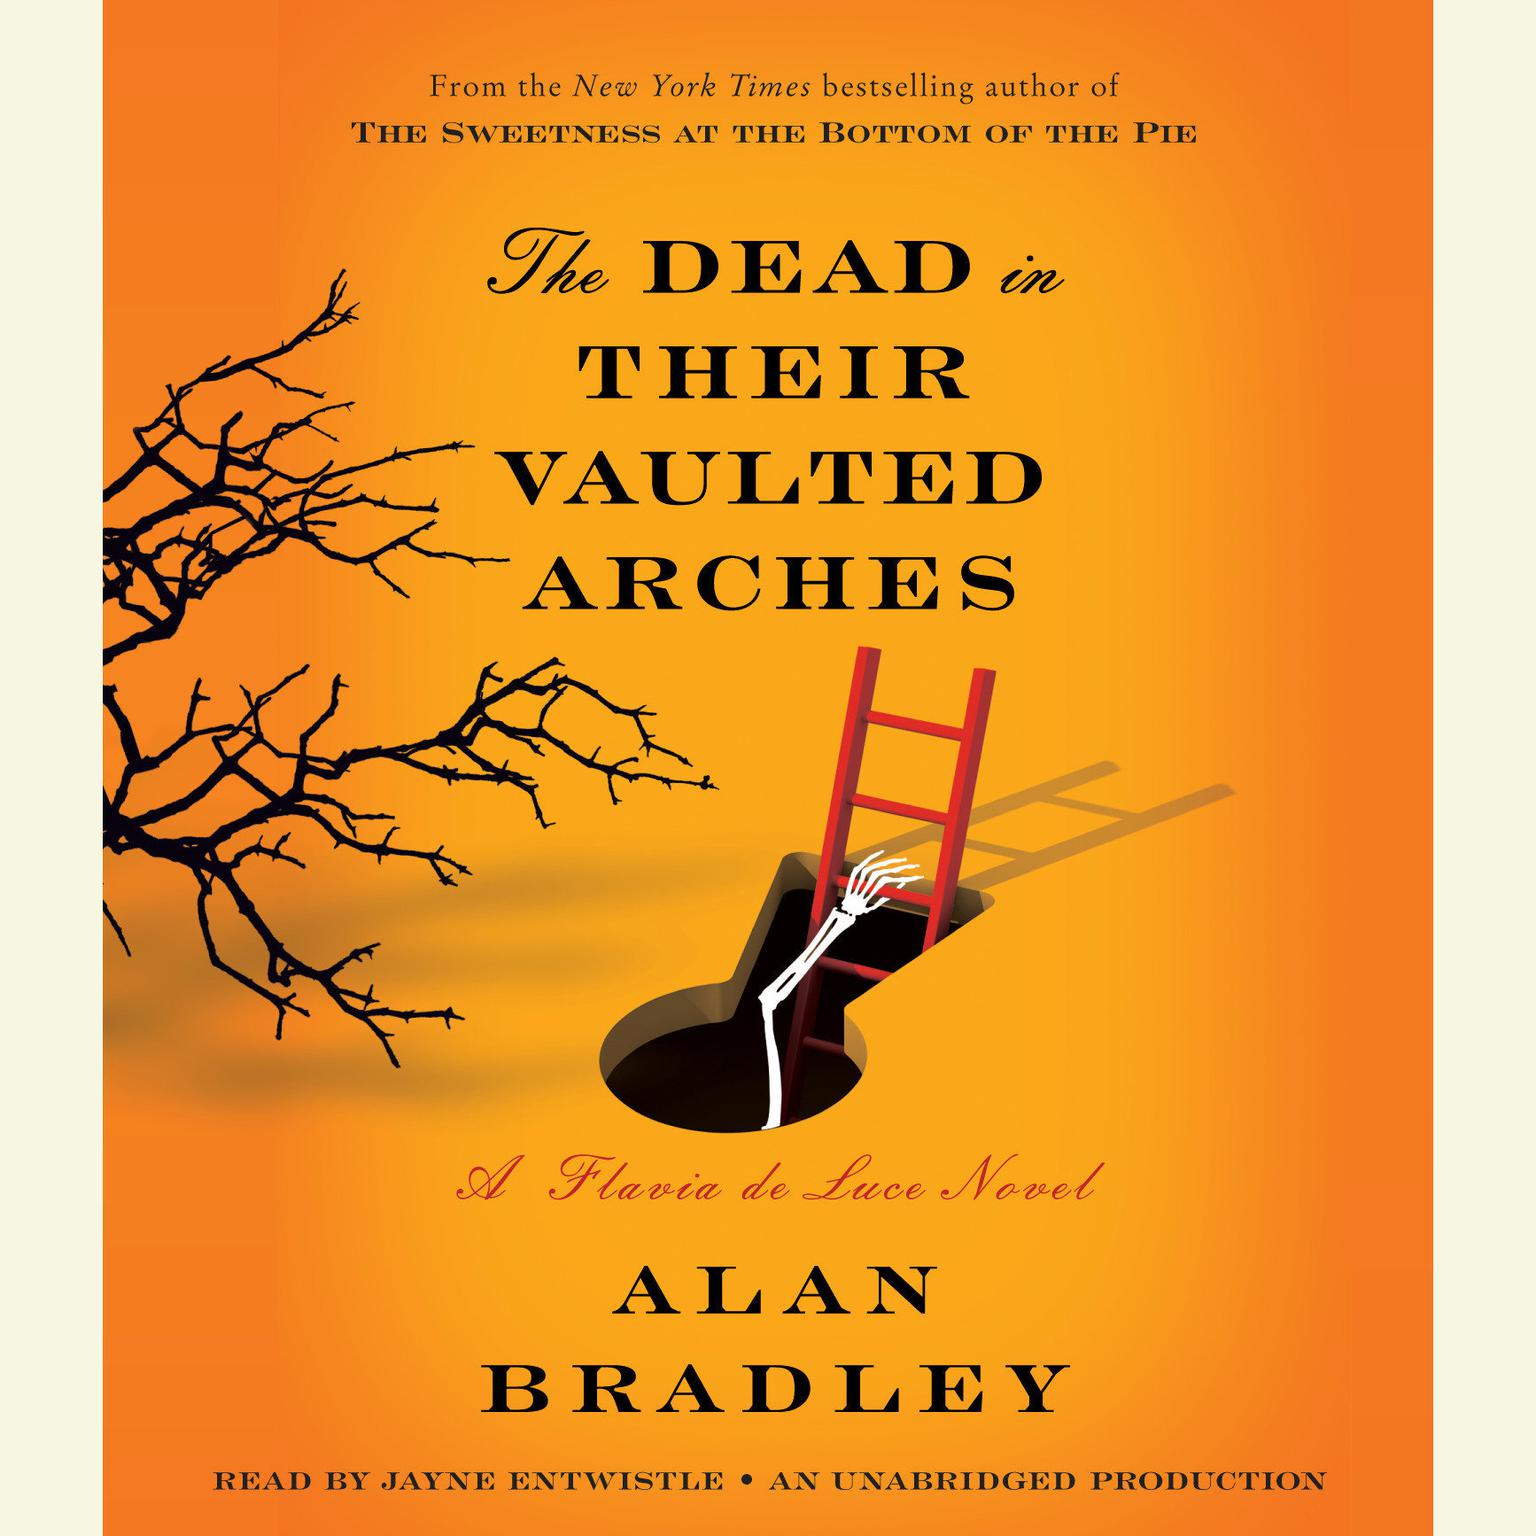 The Dead in Their Vaulted Arches: A Flavia de Luce Novel Audiobook, by Alan Bradley